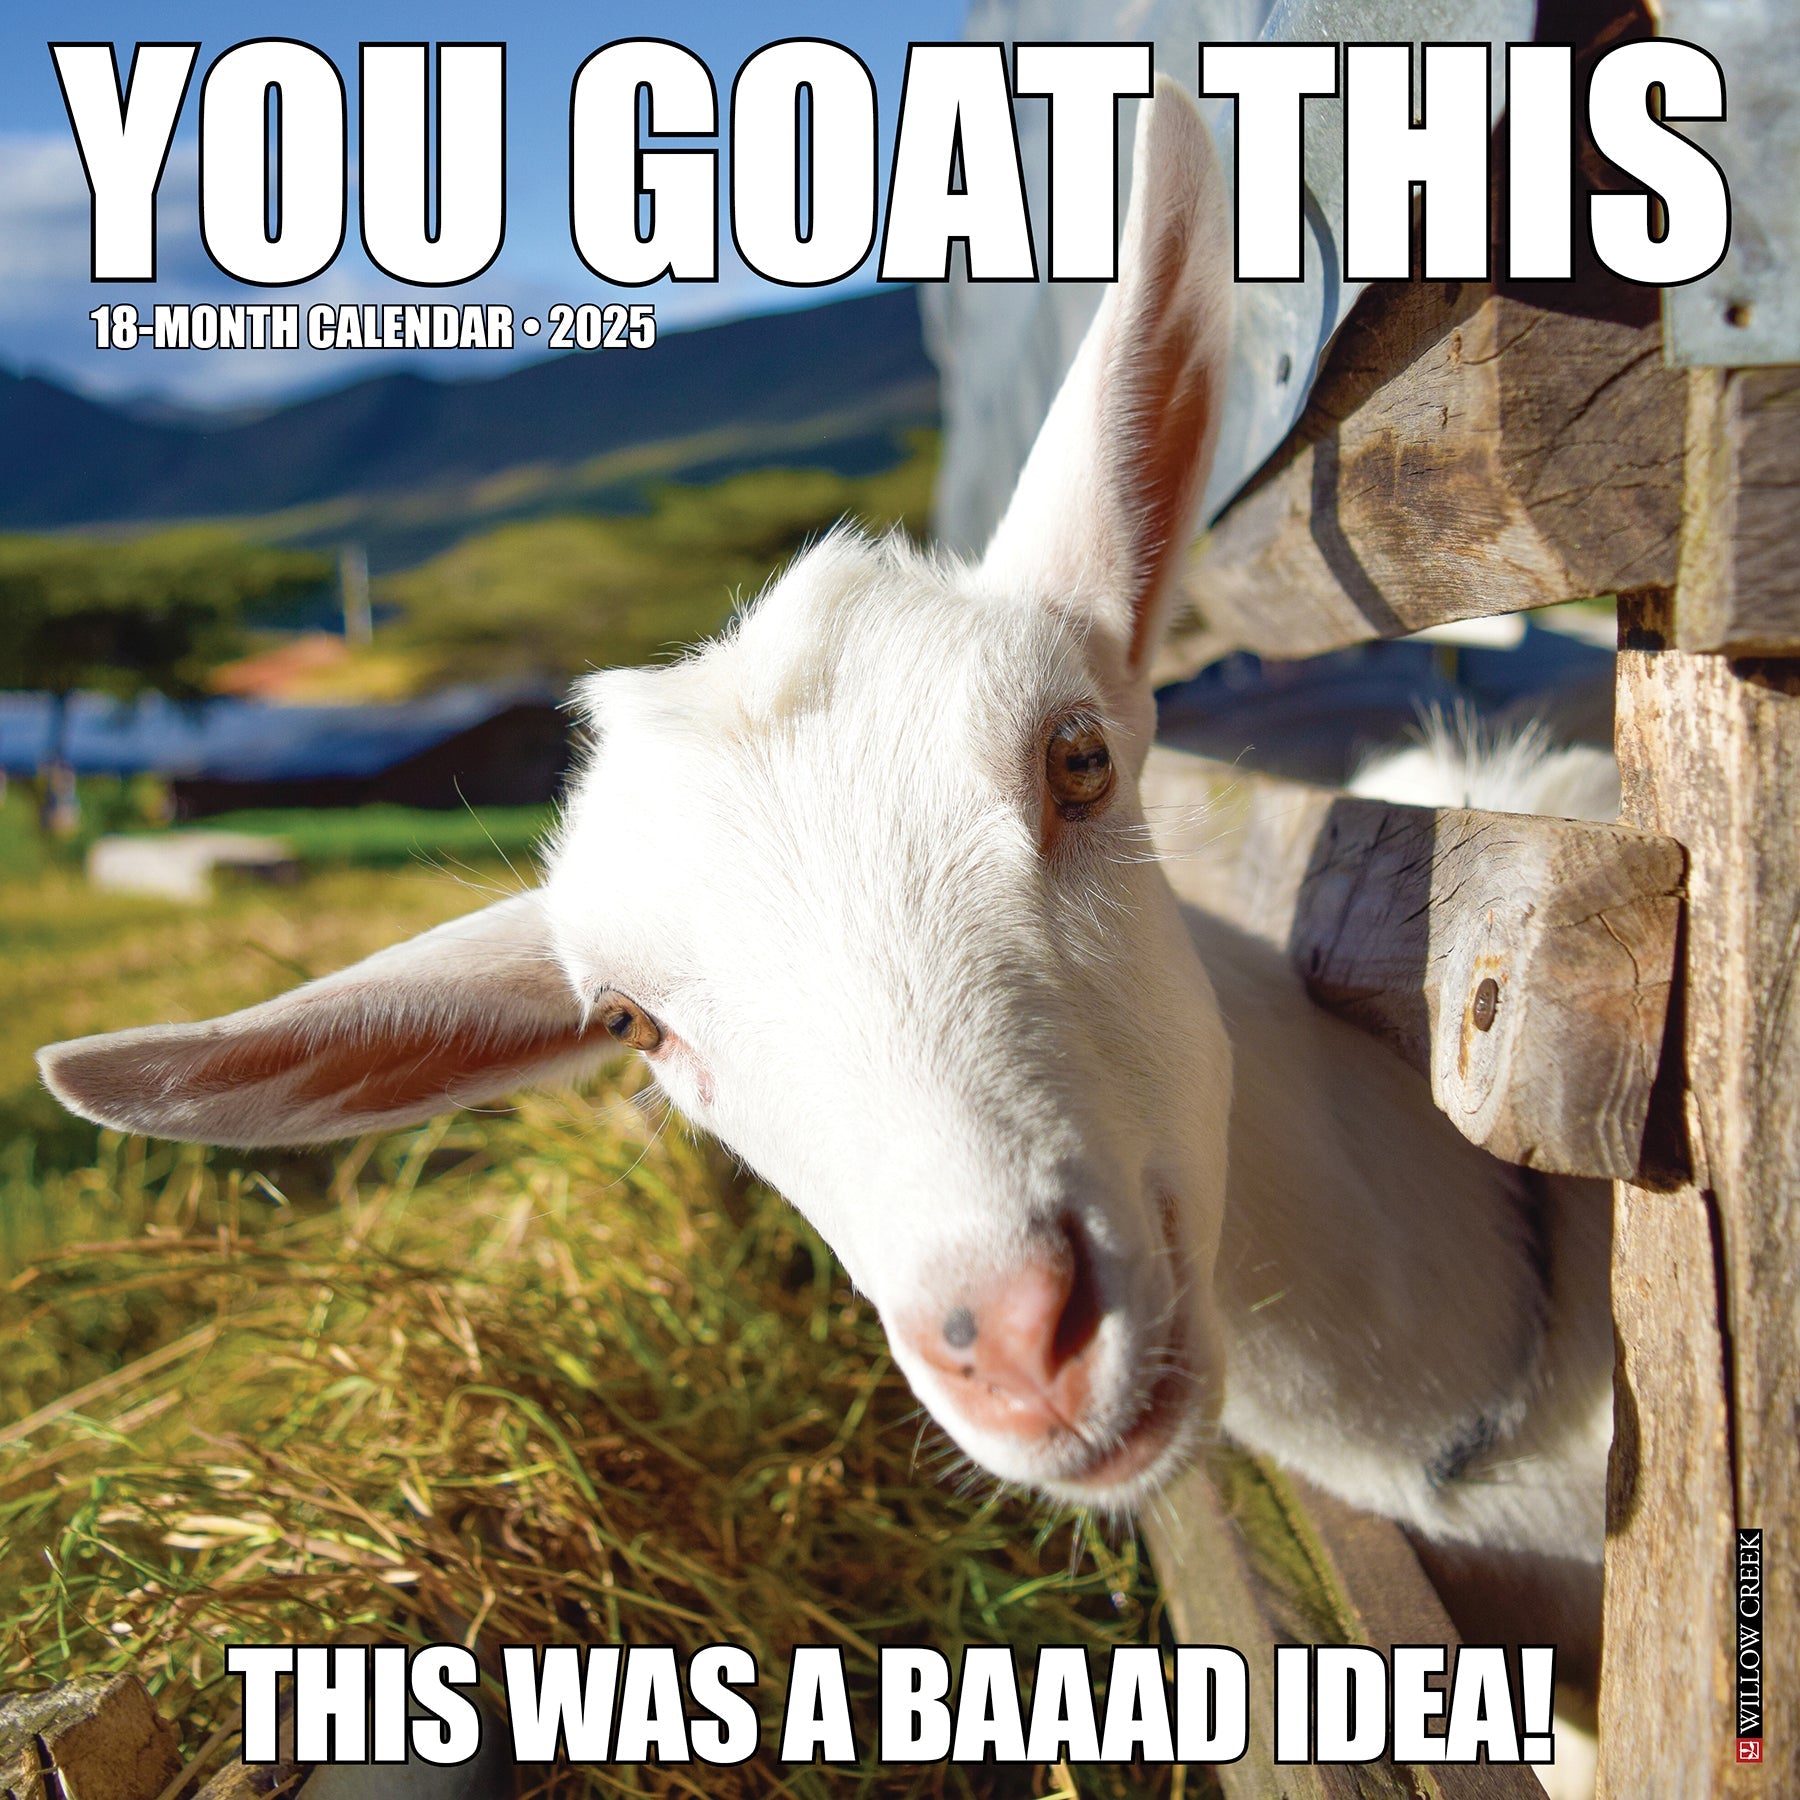 2025 You Goat This - Square Wall Calendar